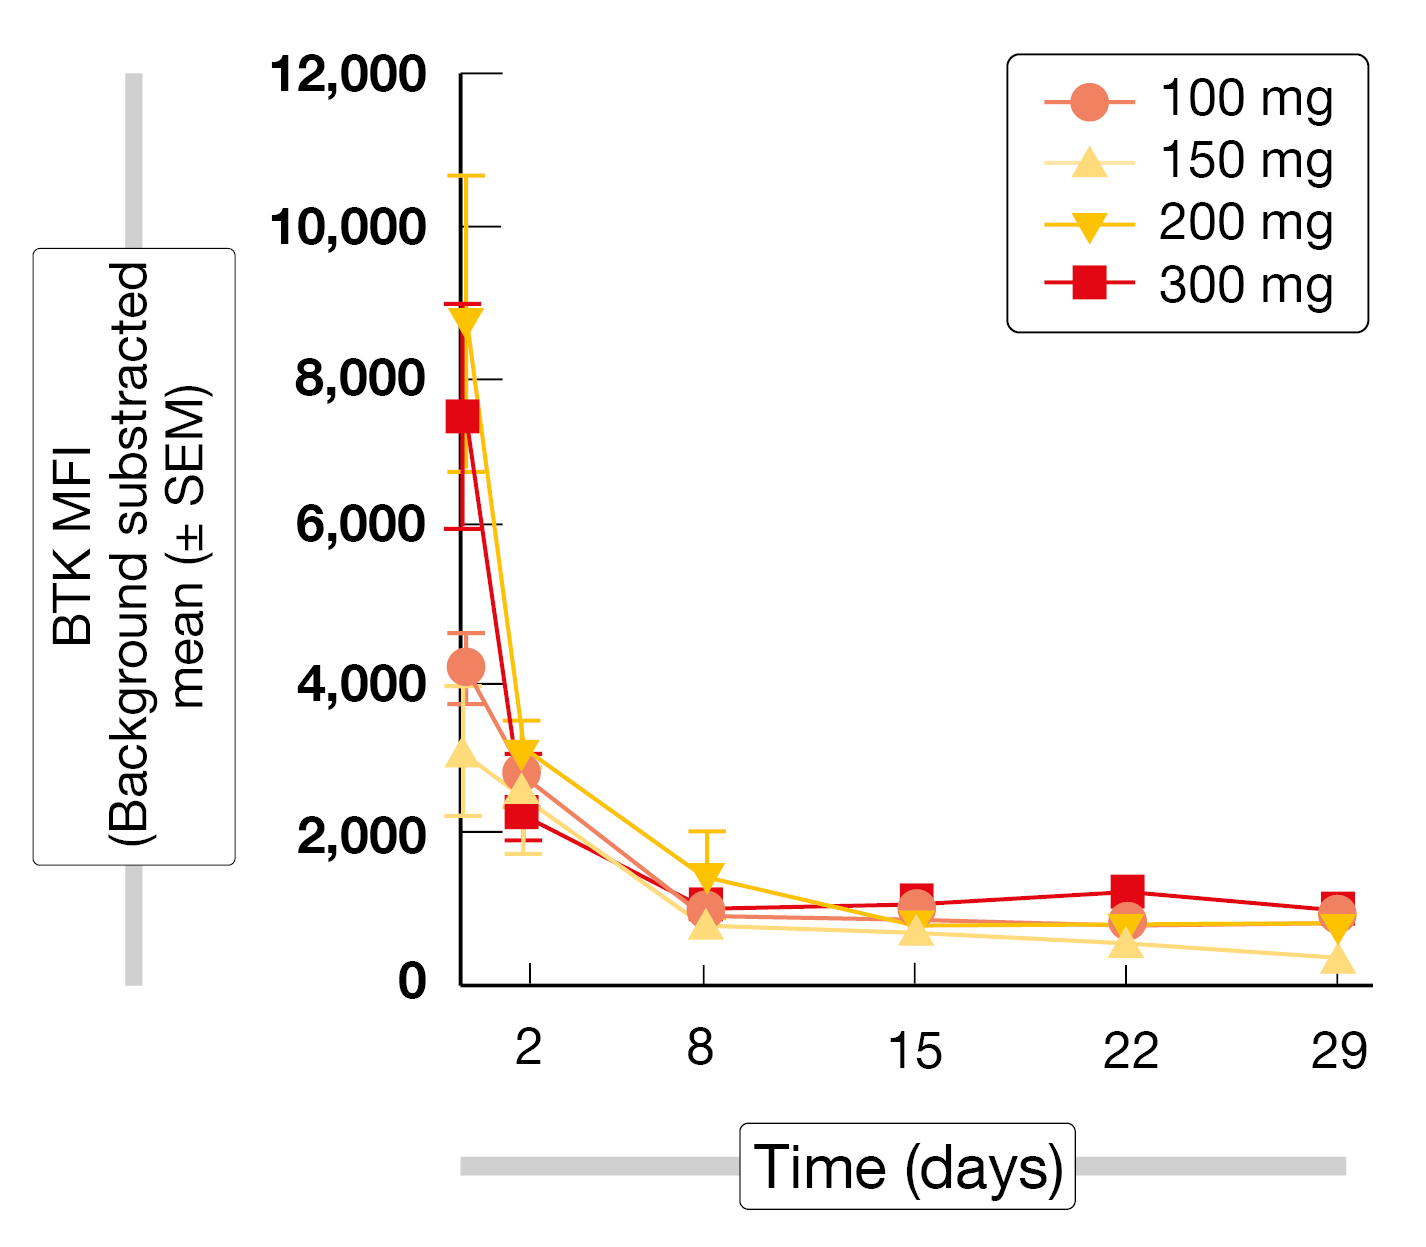 Figure: BTK degradation with NX-2127 at dose levels of 100-300 mg